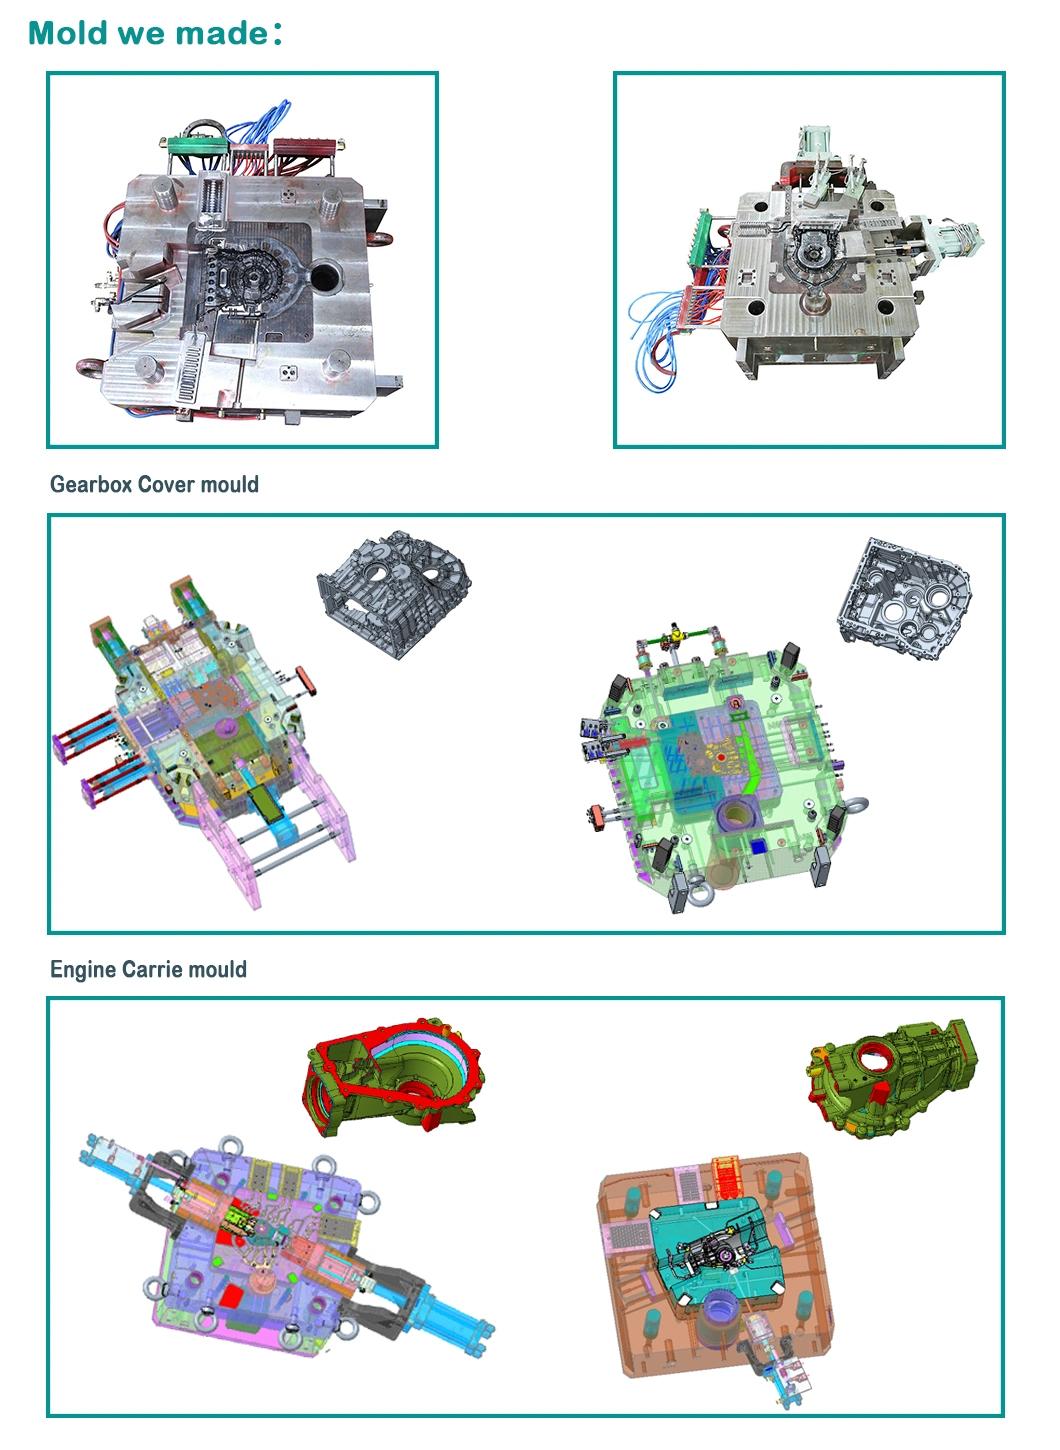 Fast Action Free Sample Injection Mould Mould Spare Parts Die Casting Die Aluminium Die Casting Mould Stamping Mould Stamping Die Metal Mould